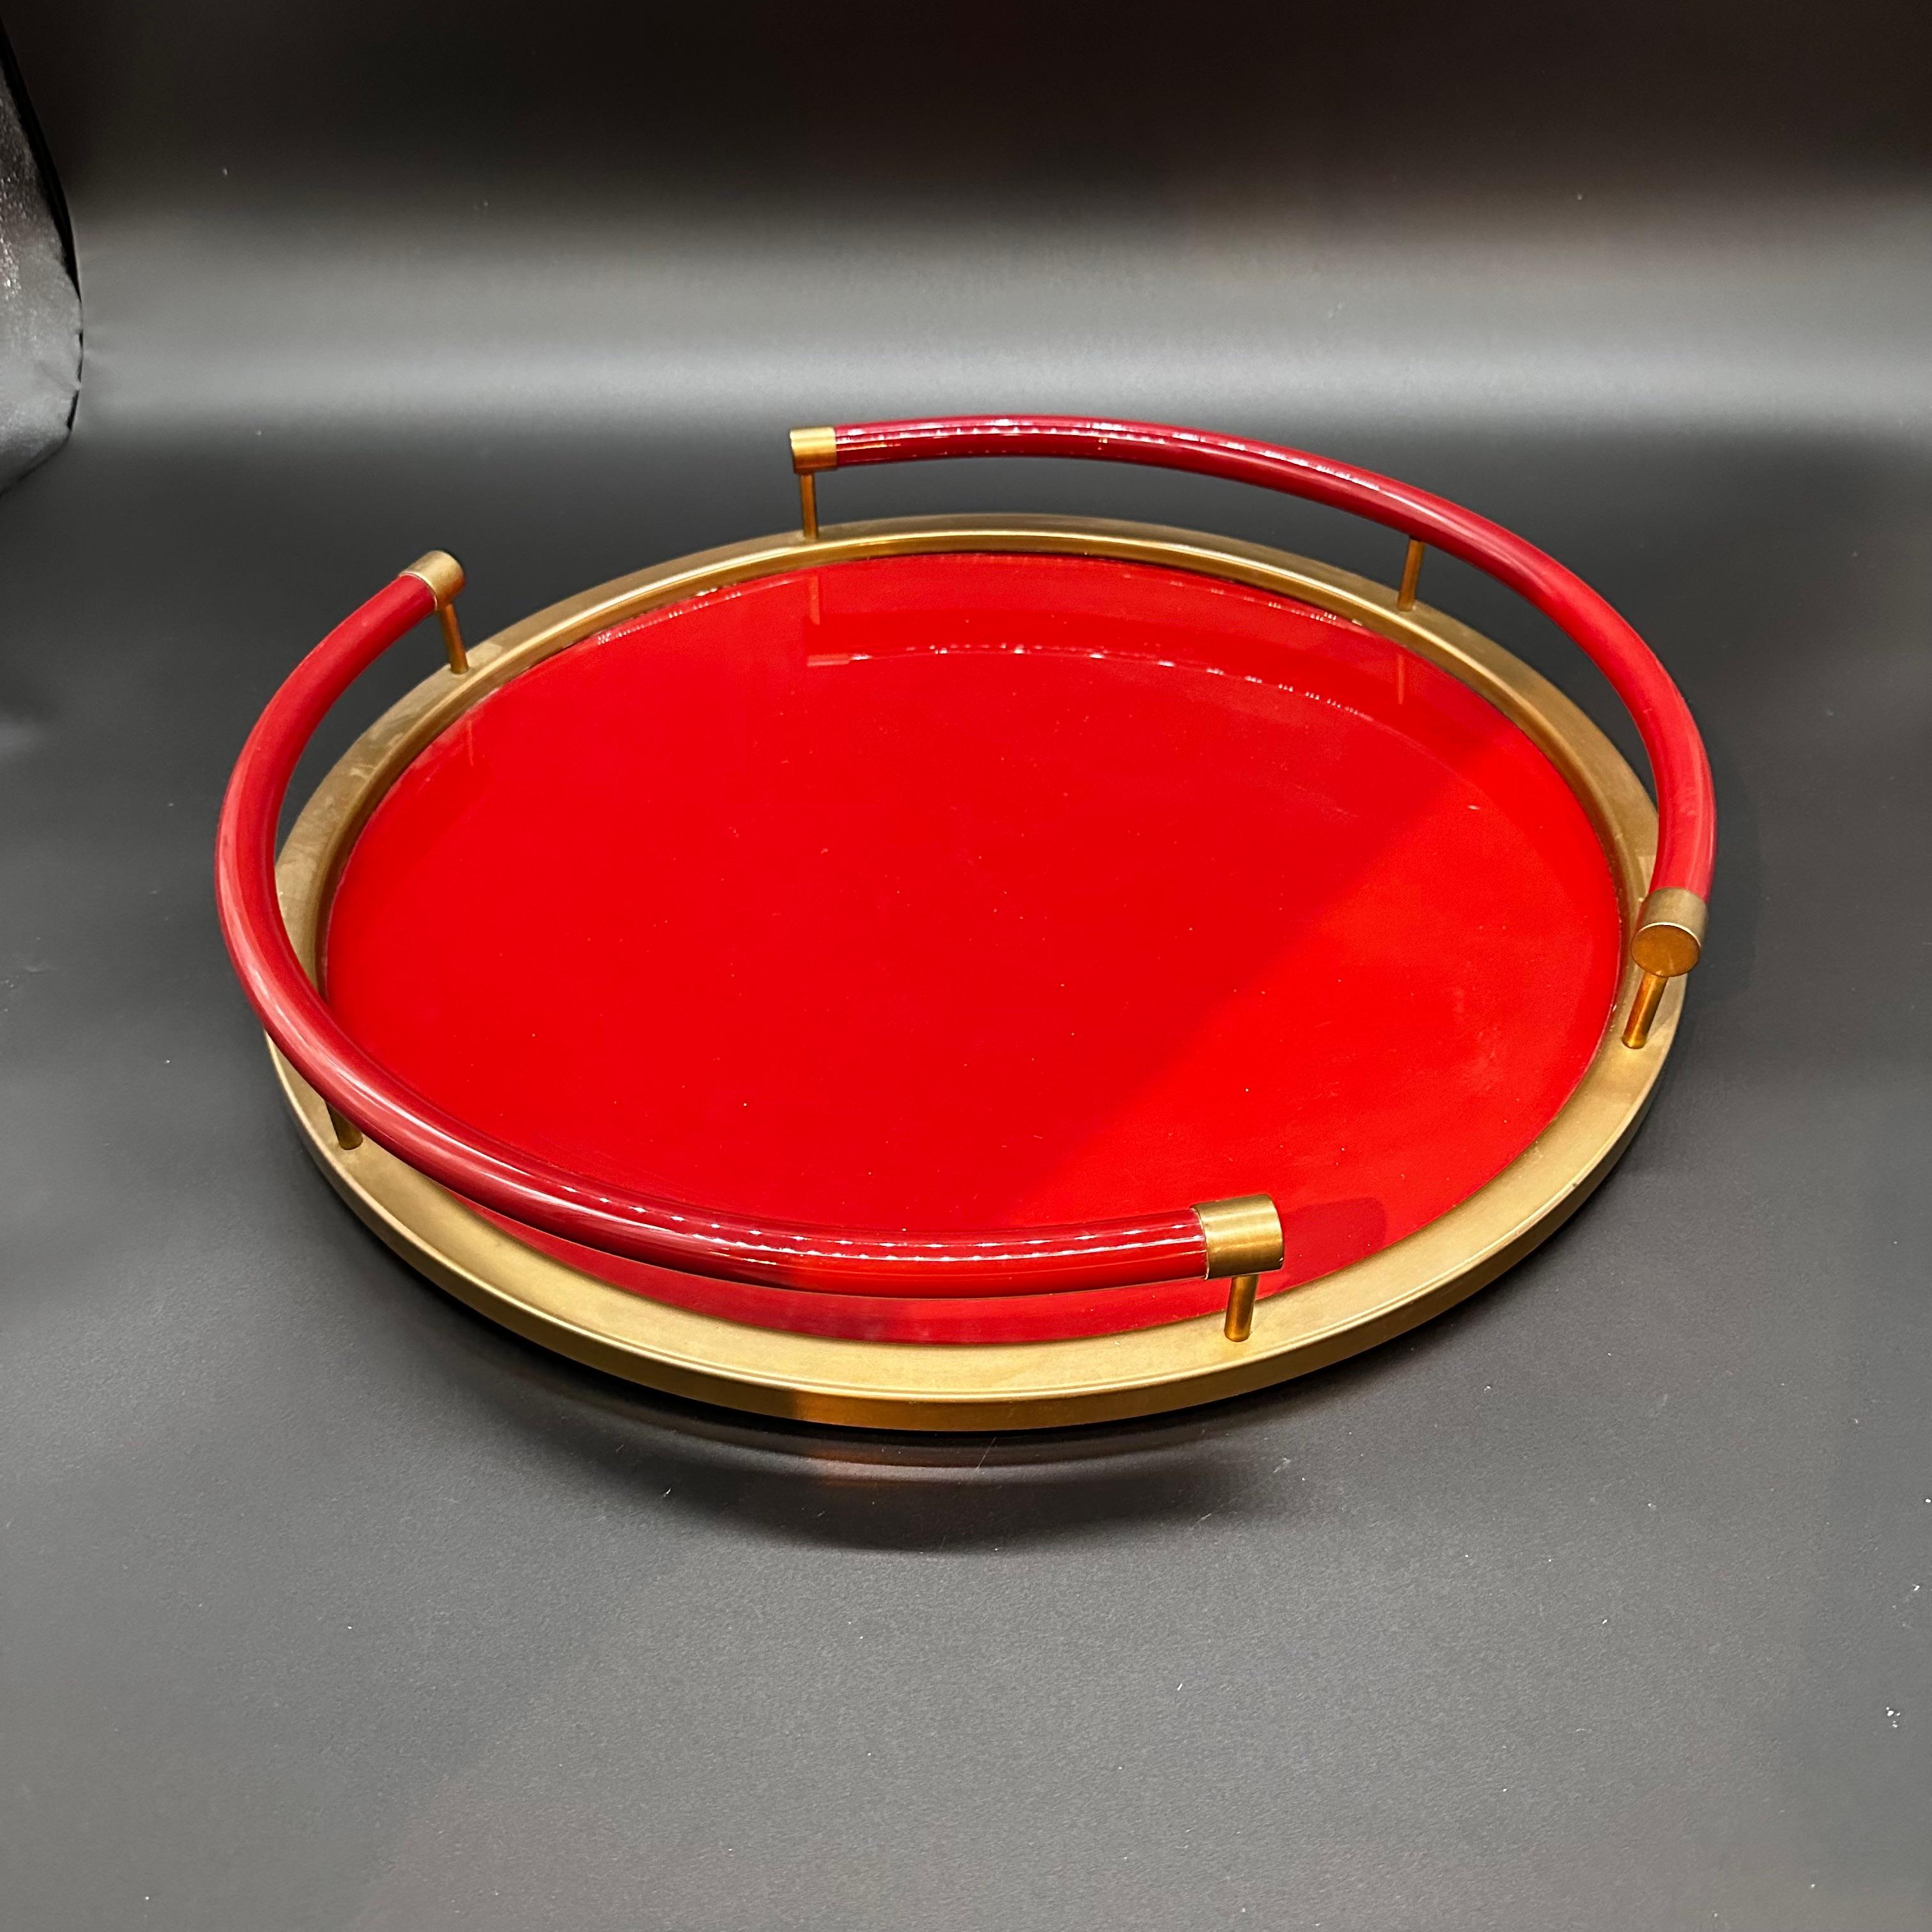 Beautiful and unique Italian red round tray with brass details.

